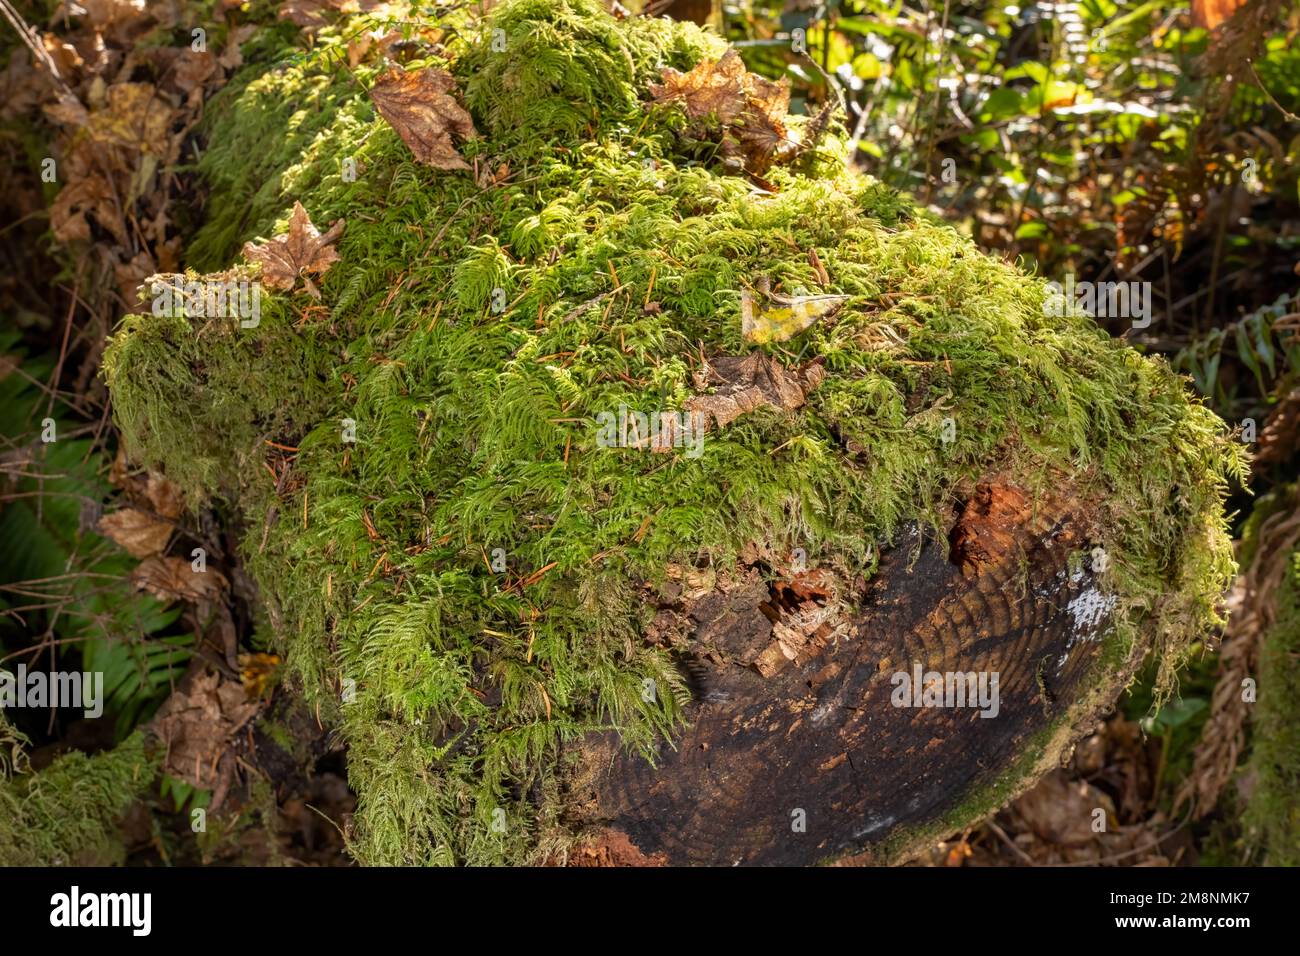 May Valley County Park, Issaquah, Washington, USA.  Moss-covered log showing tree rings. Stock Photo